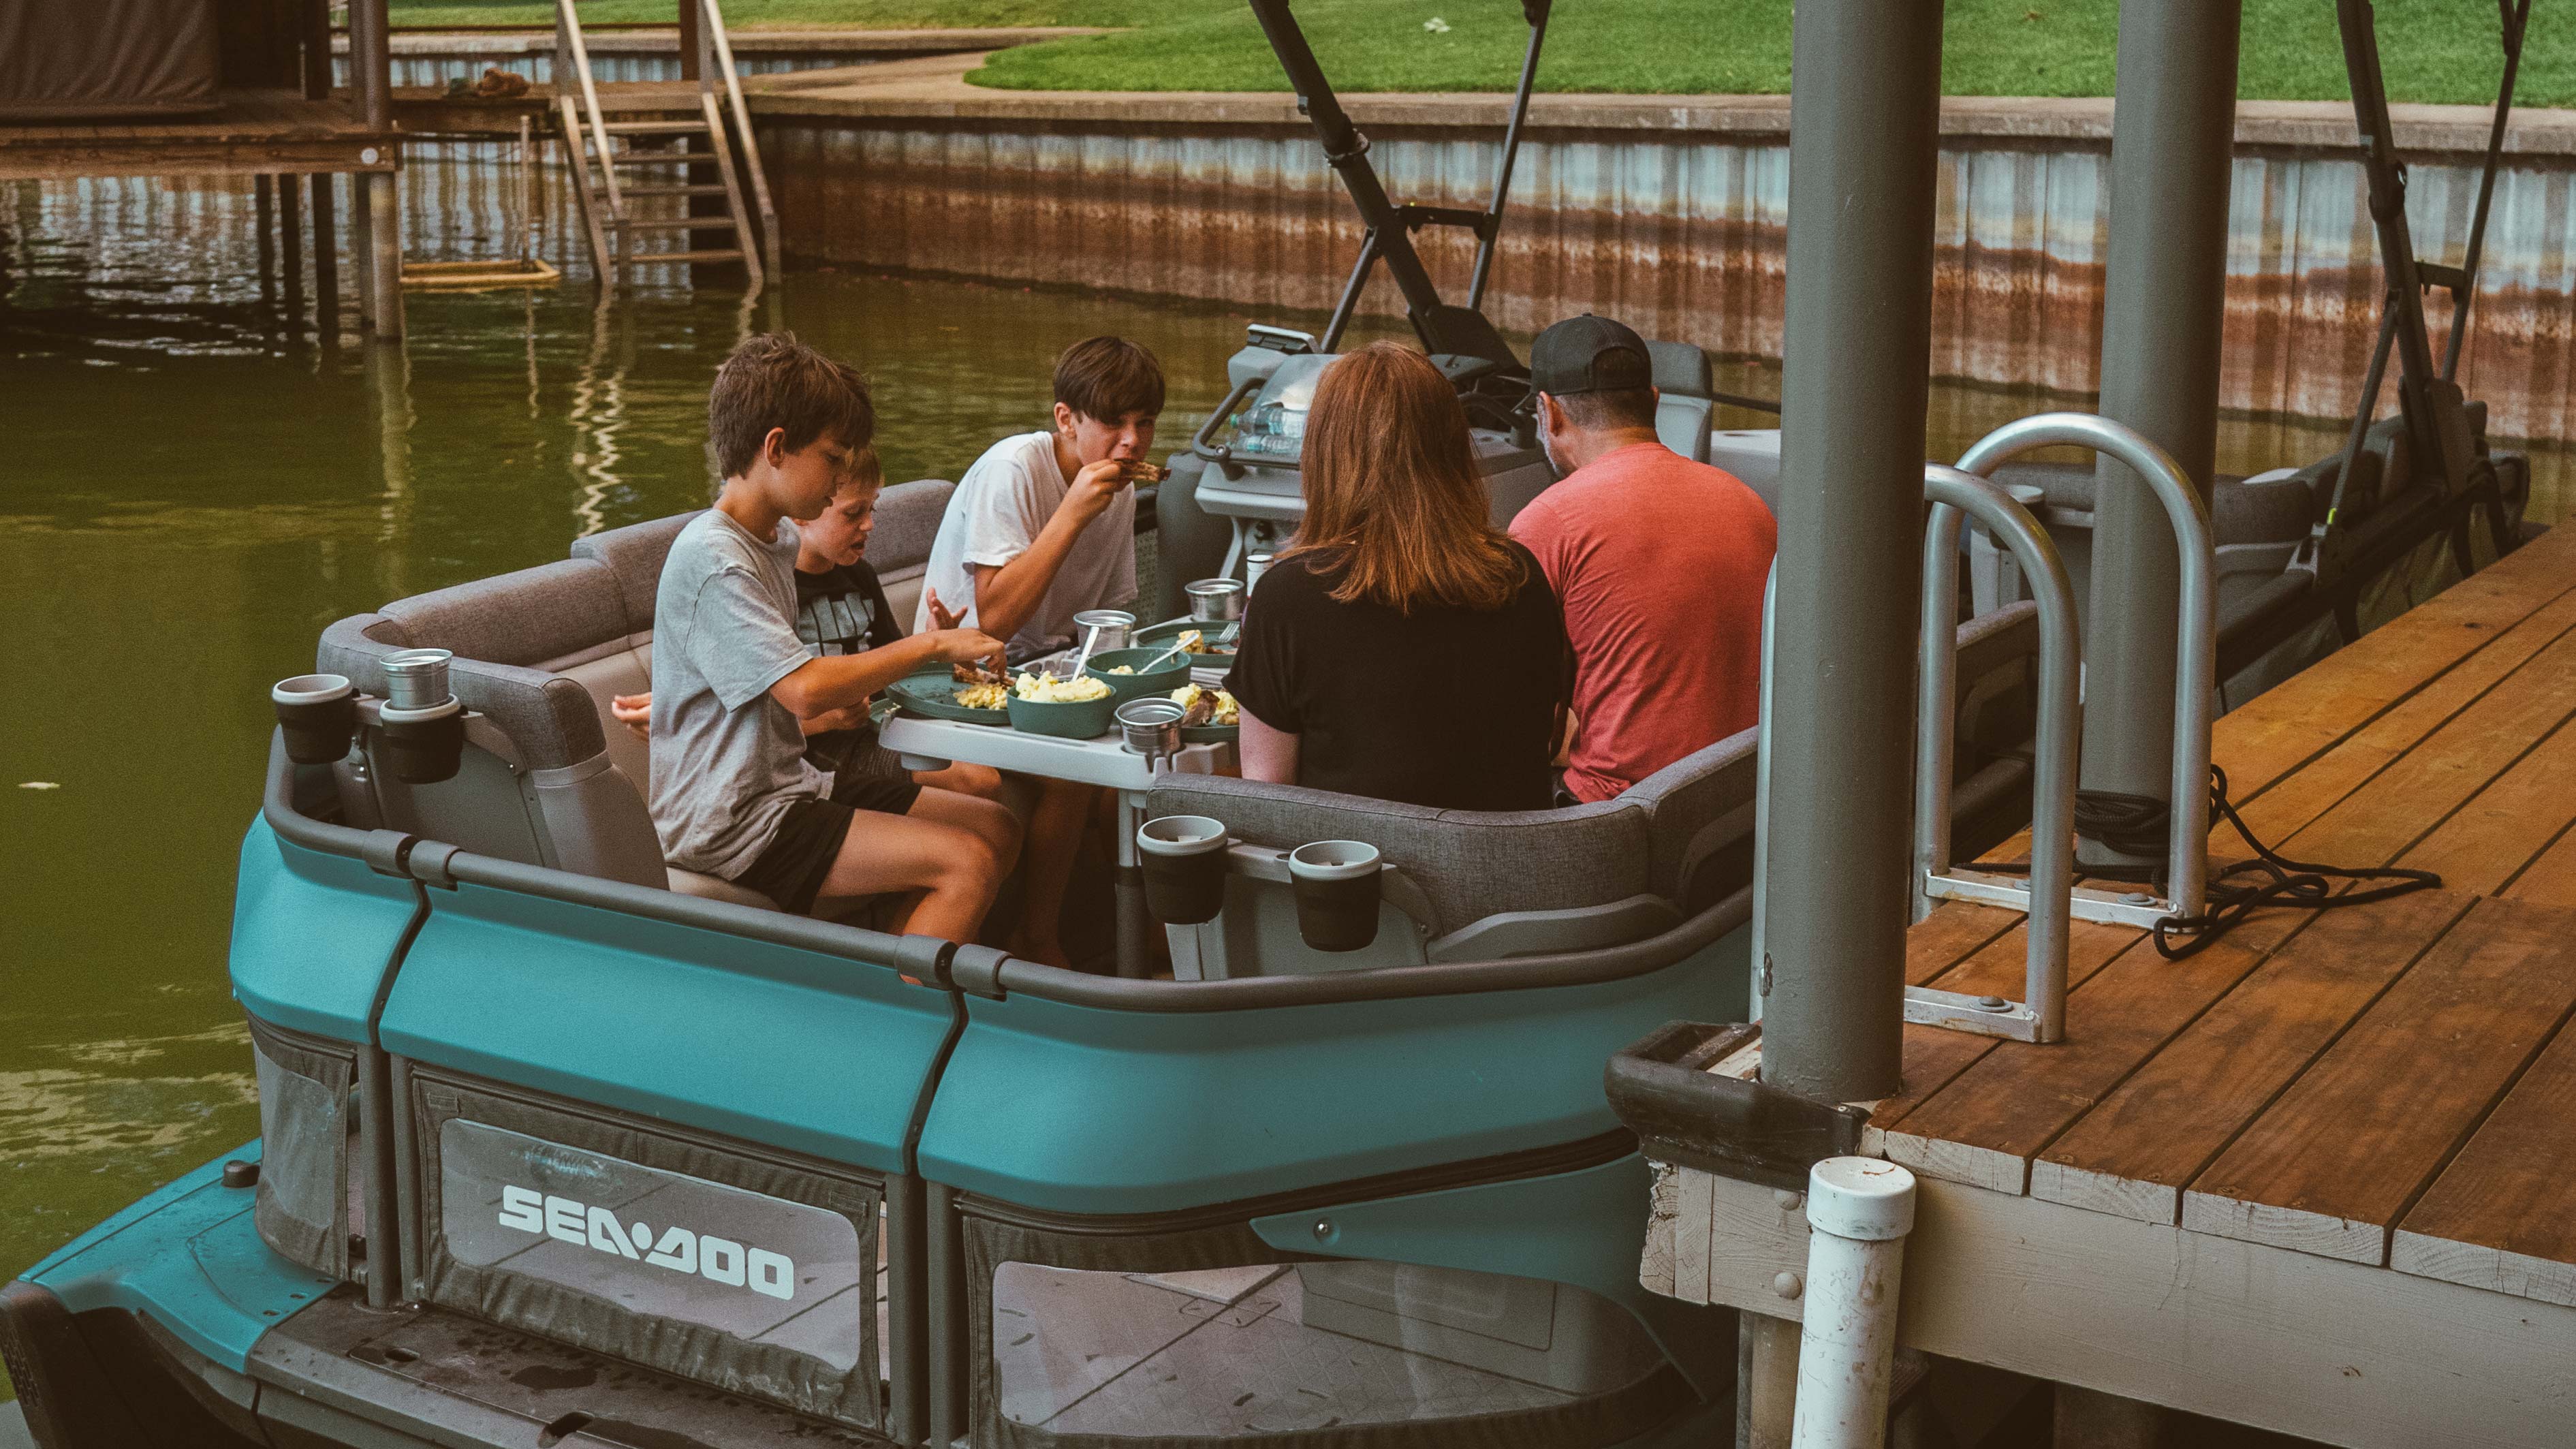 The Evans family having dinner on their Sea-Doo SWITCH